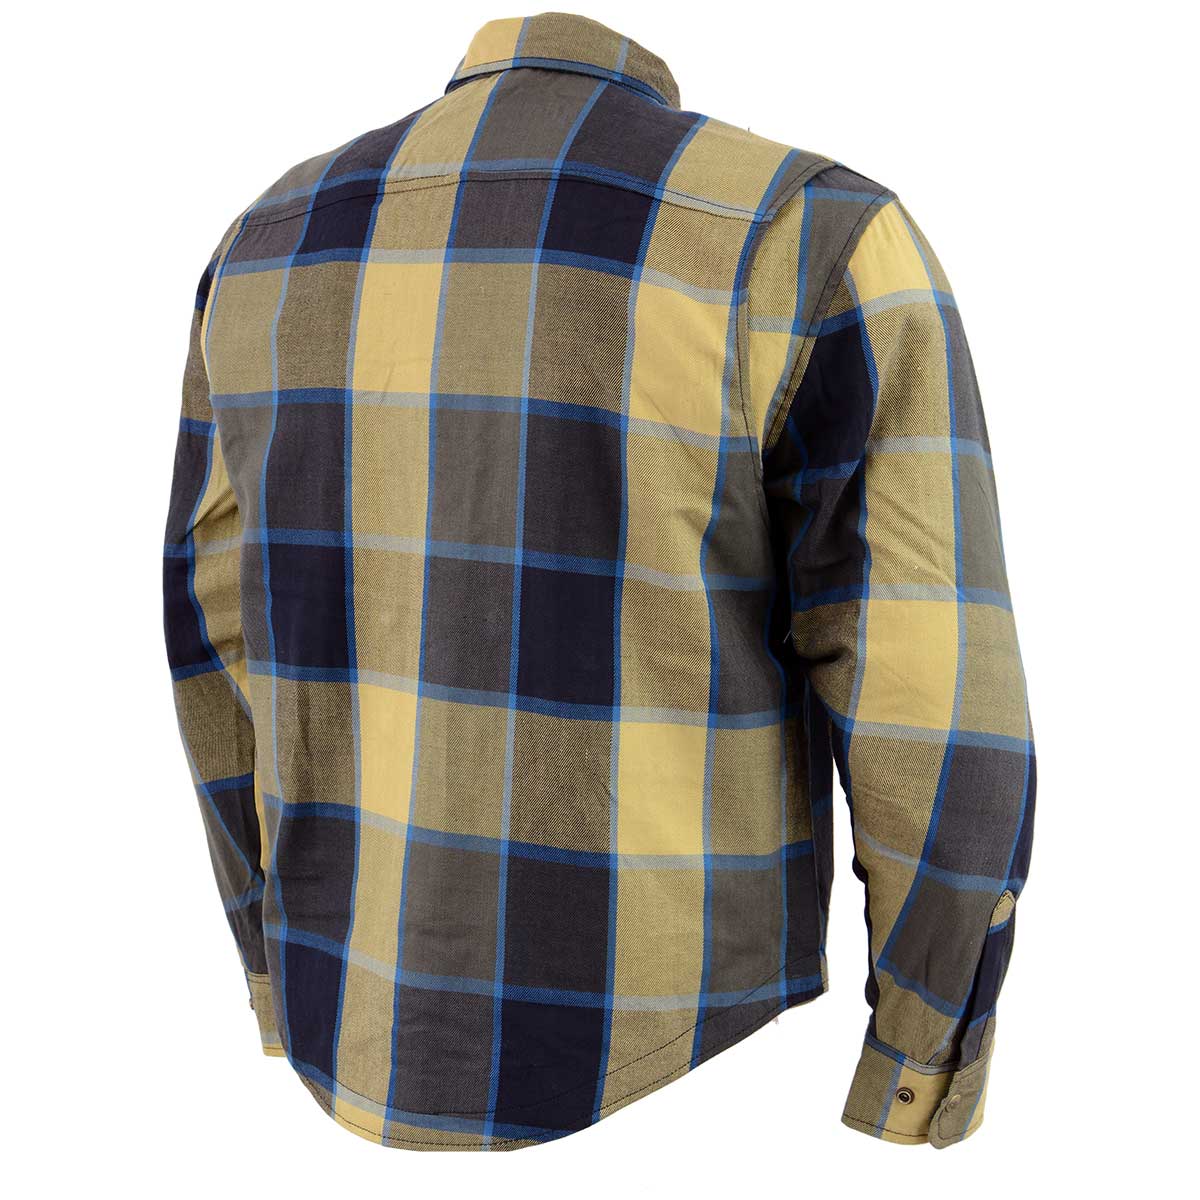 Milwaukee Leather MPM1639 Men's Plaid Flannel Biker Shirt with CE Approved Armor - Reinforced w/ Aramid Fibers